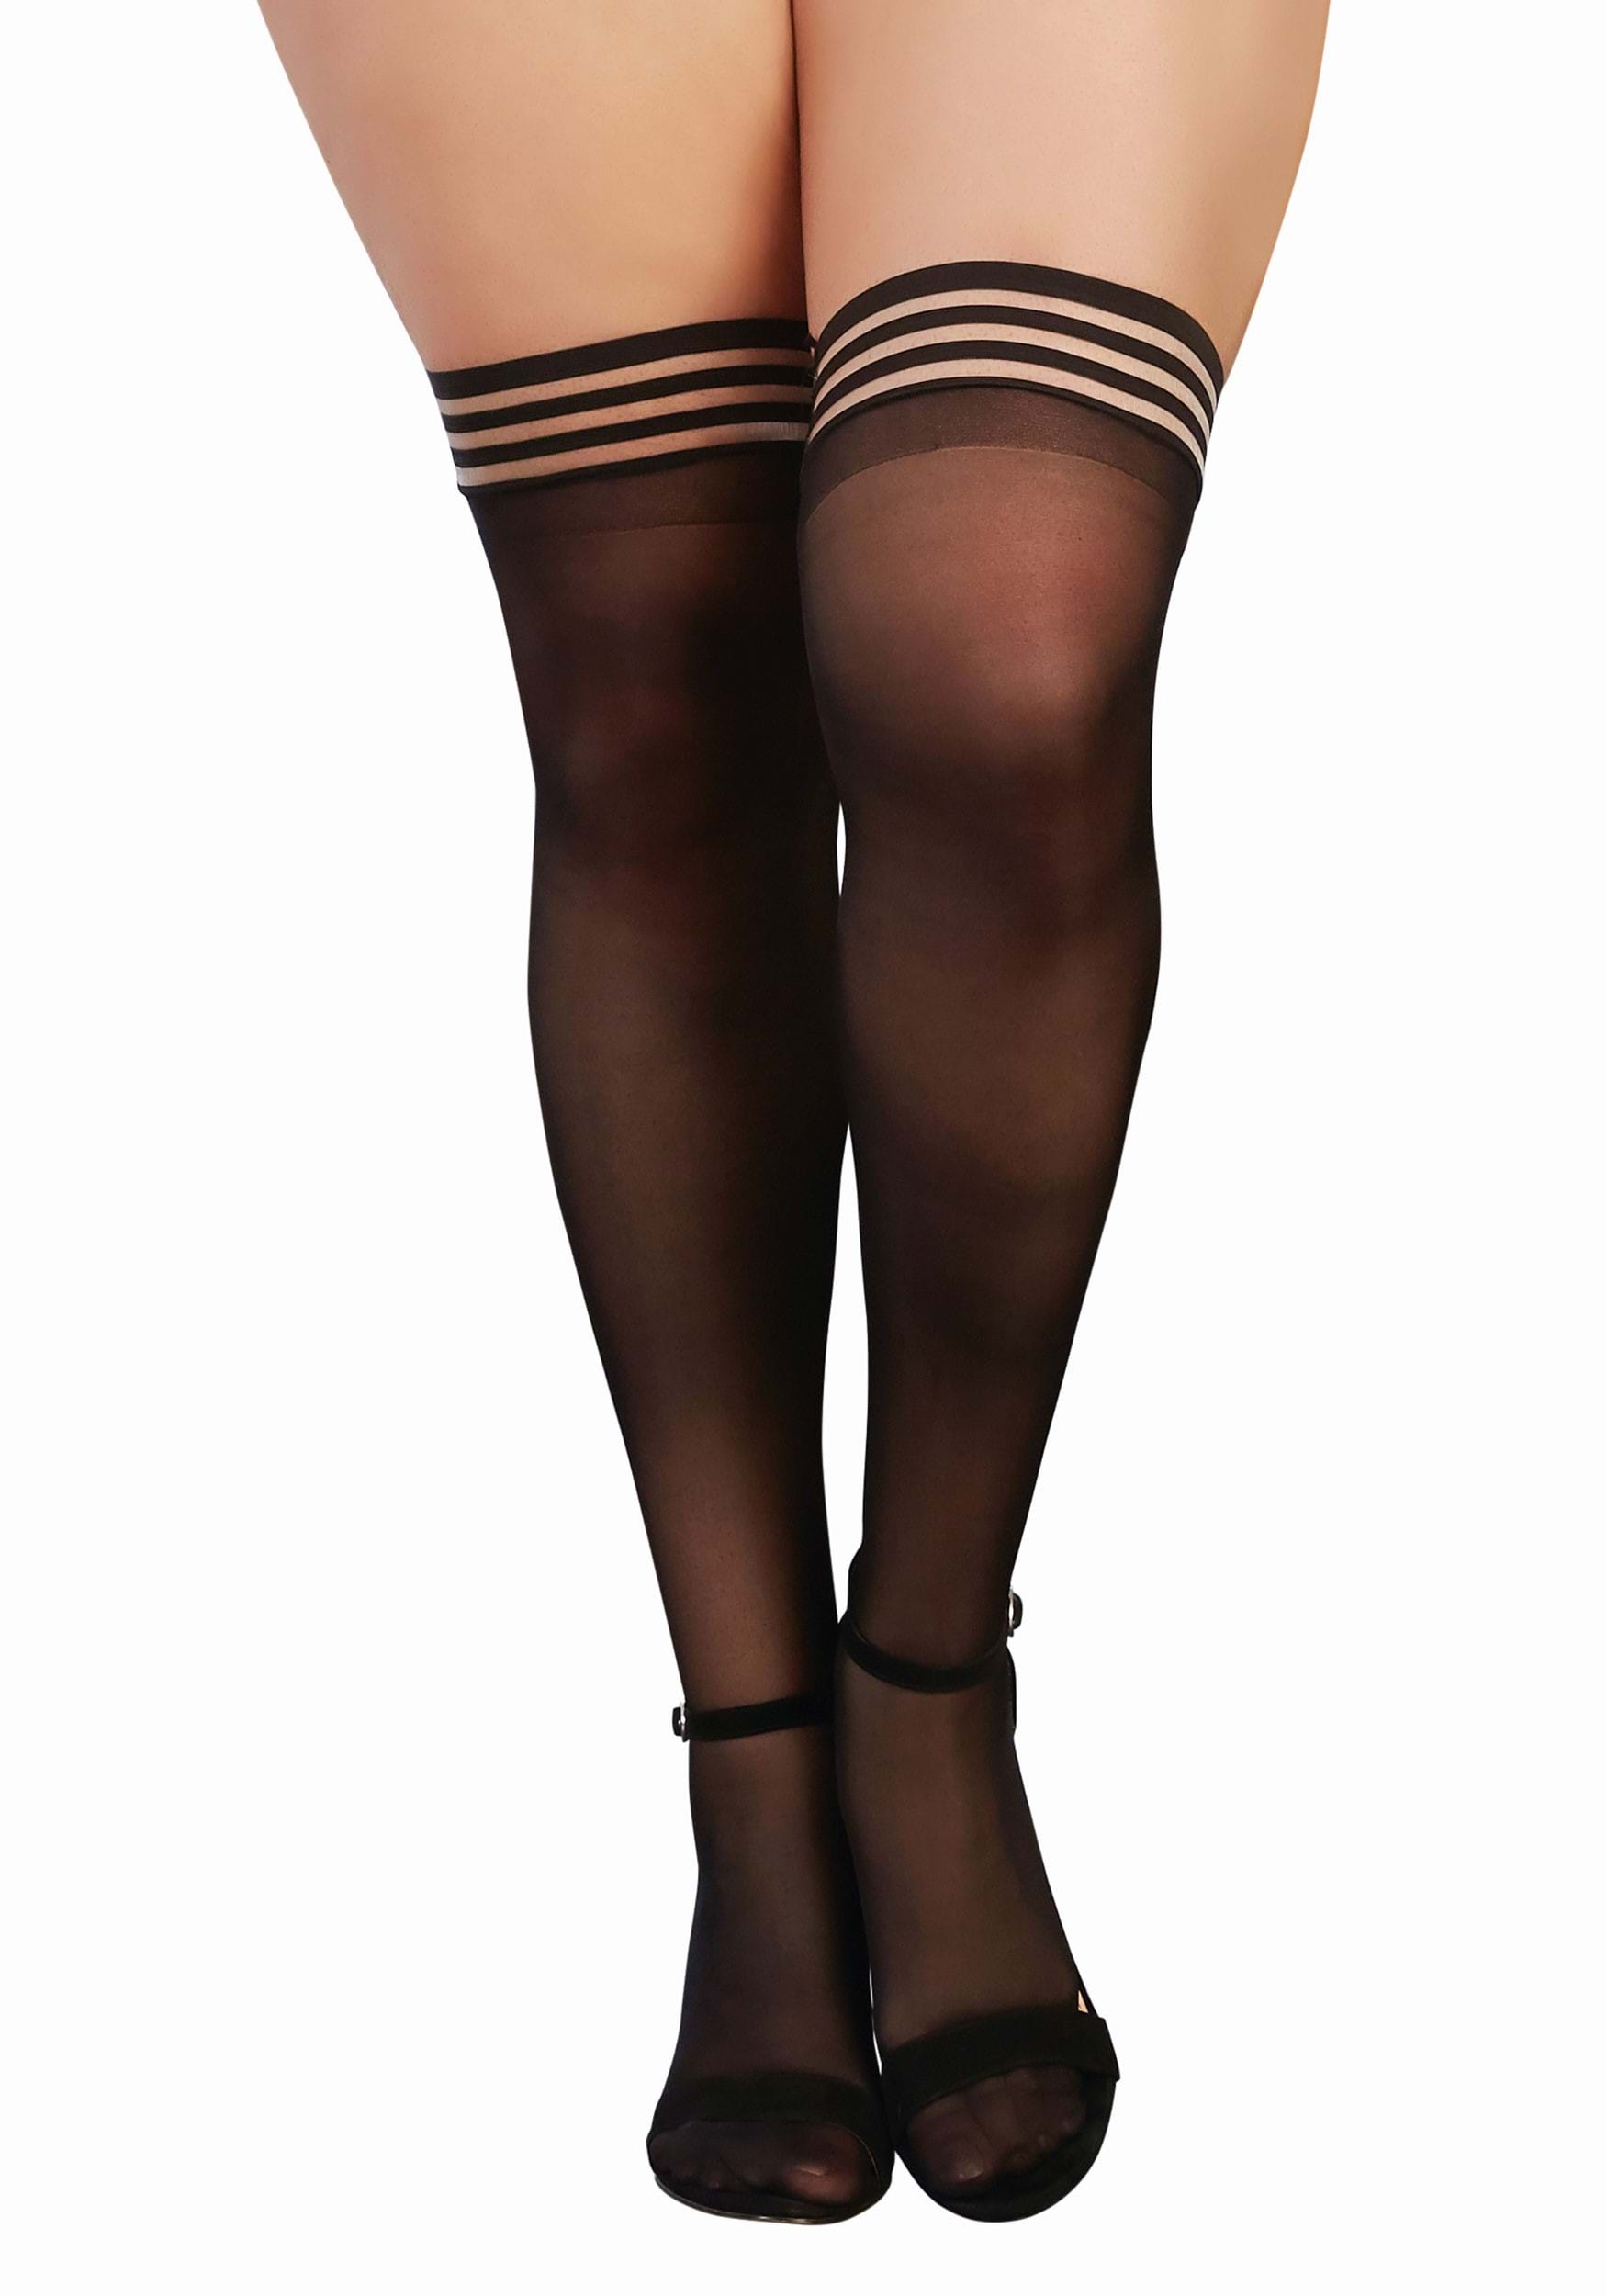 Fishnet stockings black for women | mesh tights available in plus size.